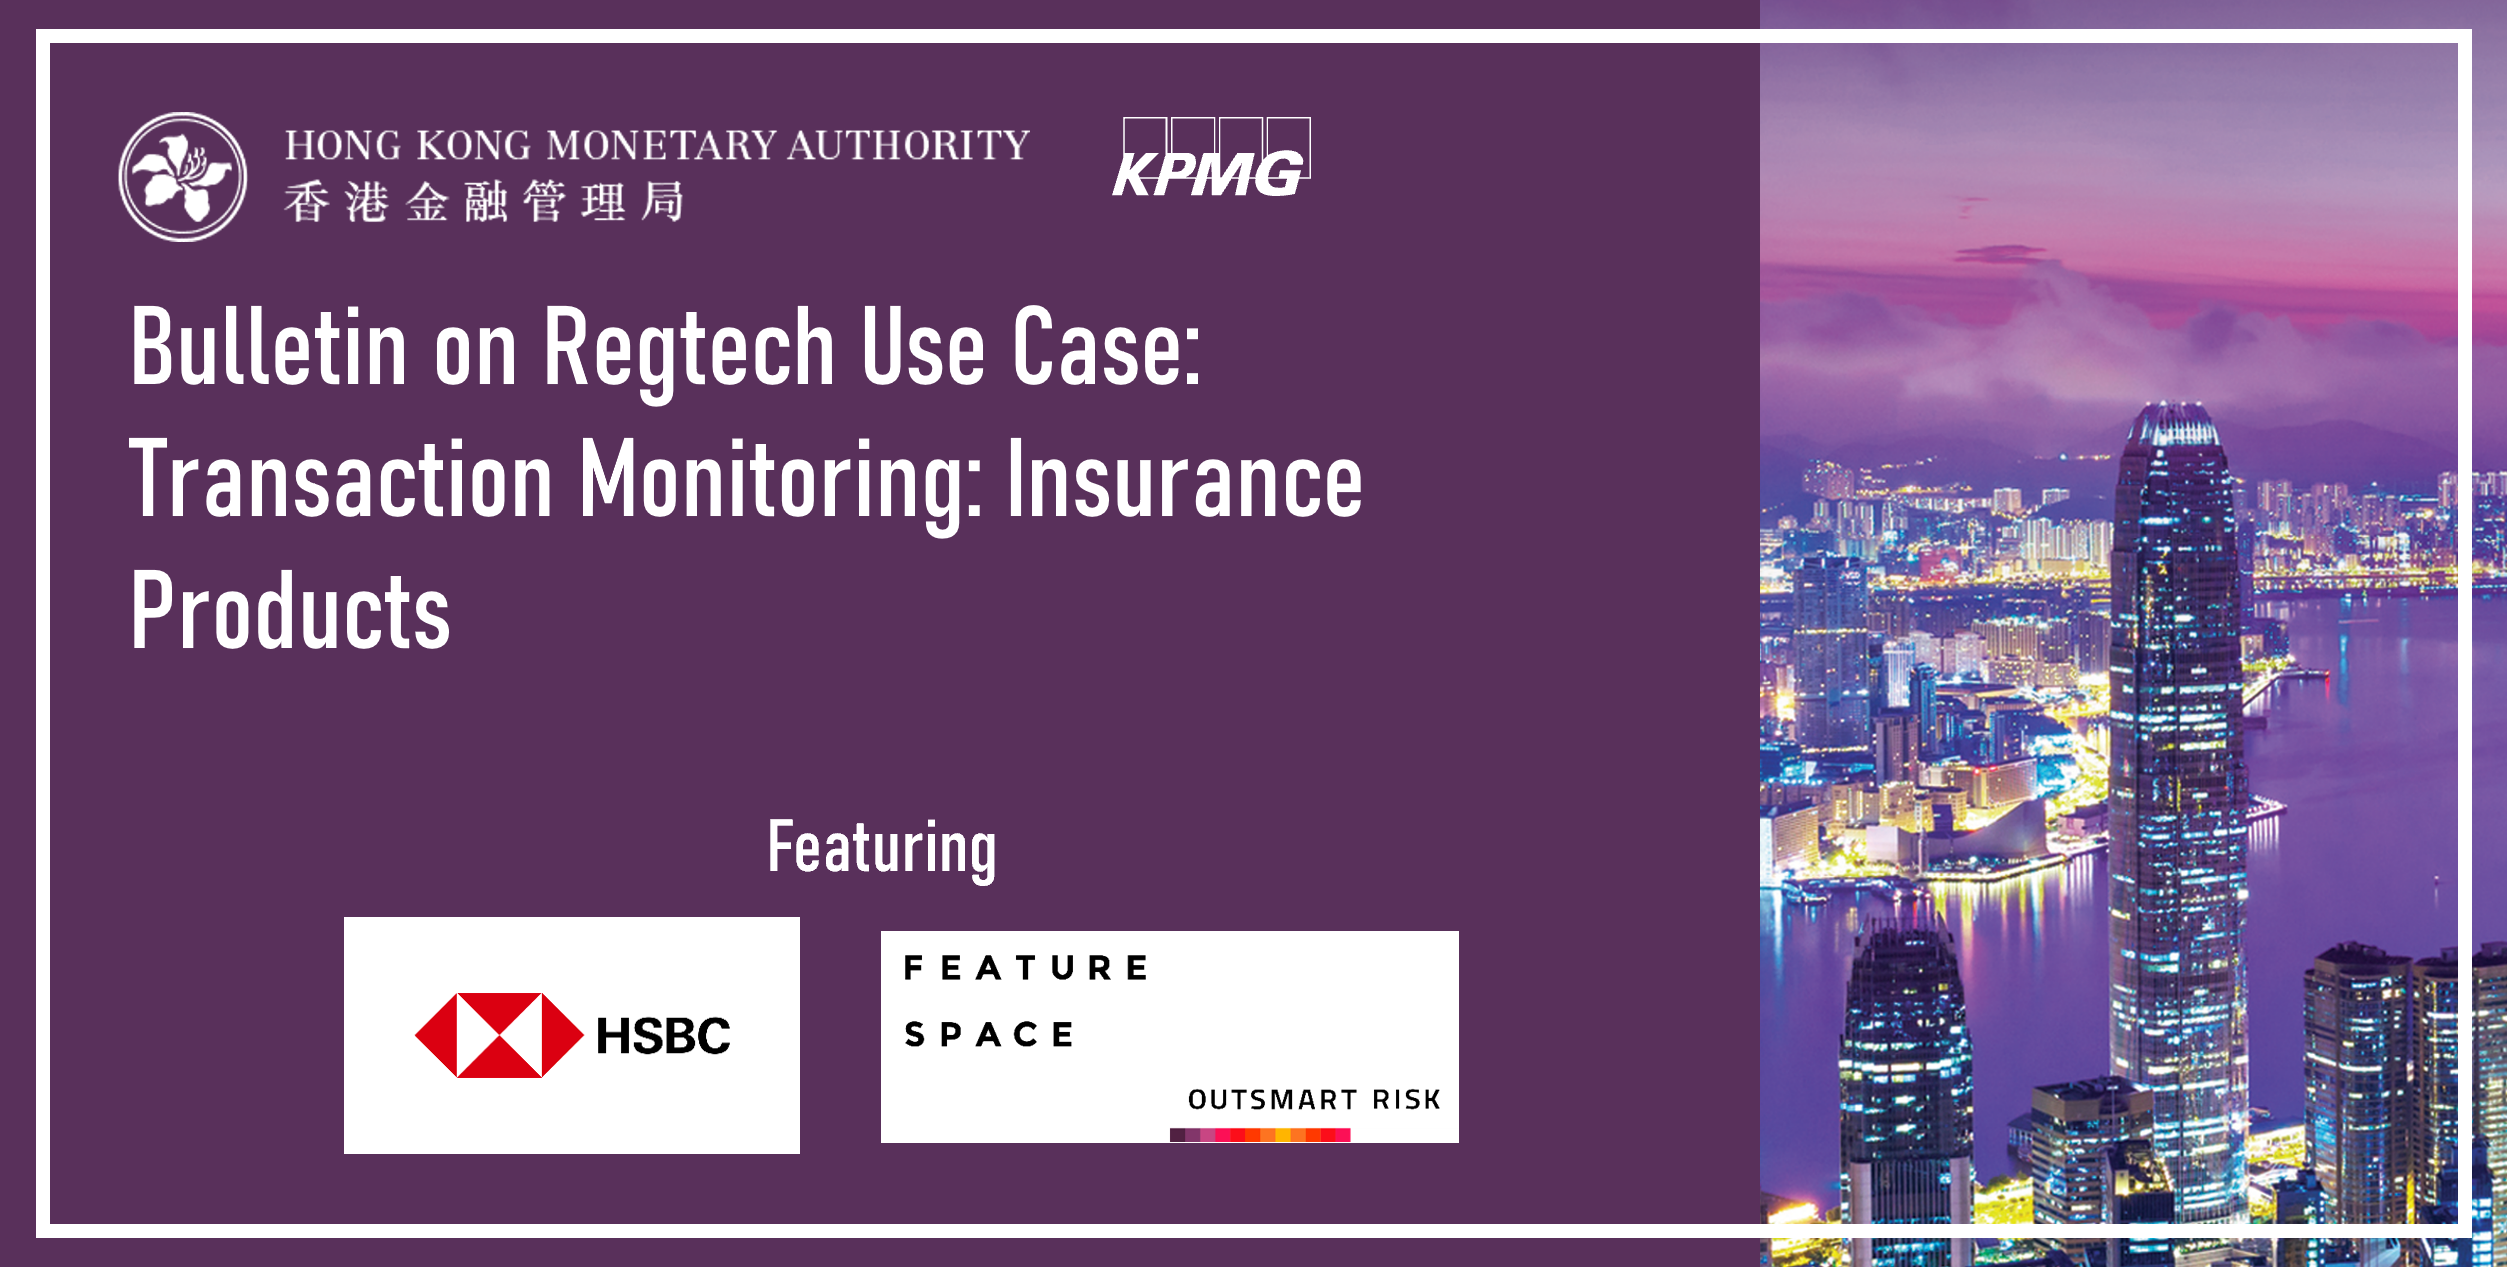 Regtech Use Case Bulletin | Transaction Monitoring for Insurance Products